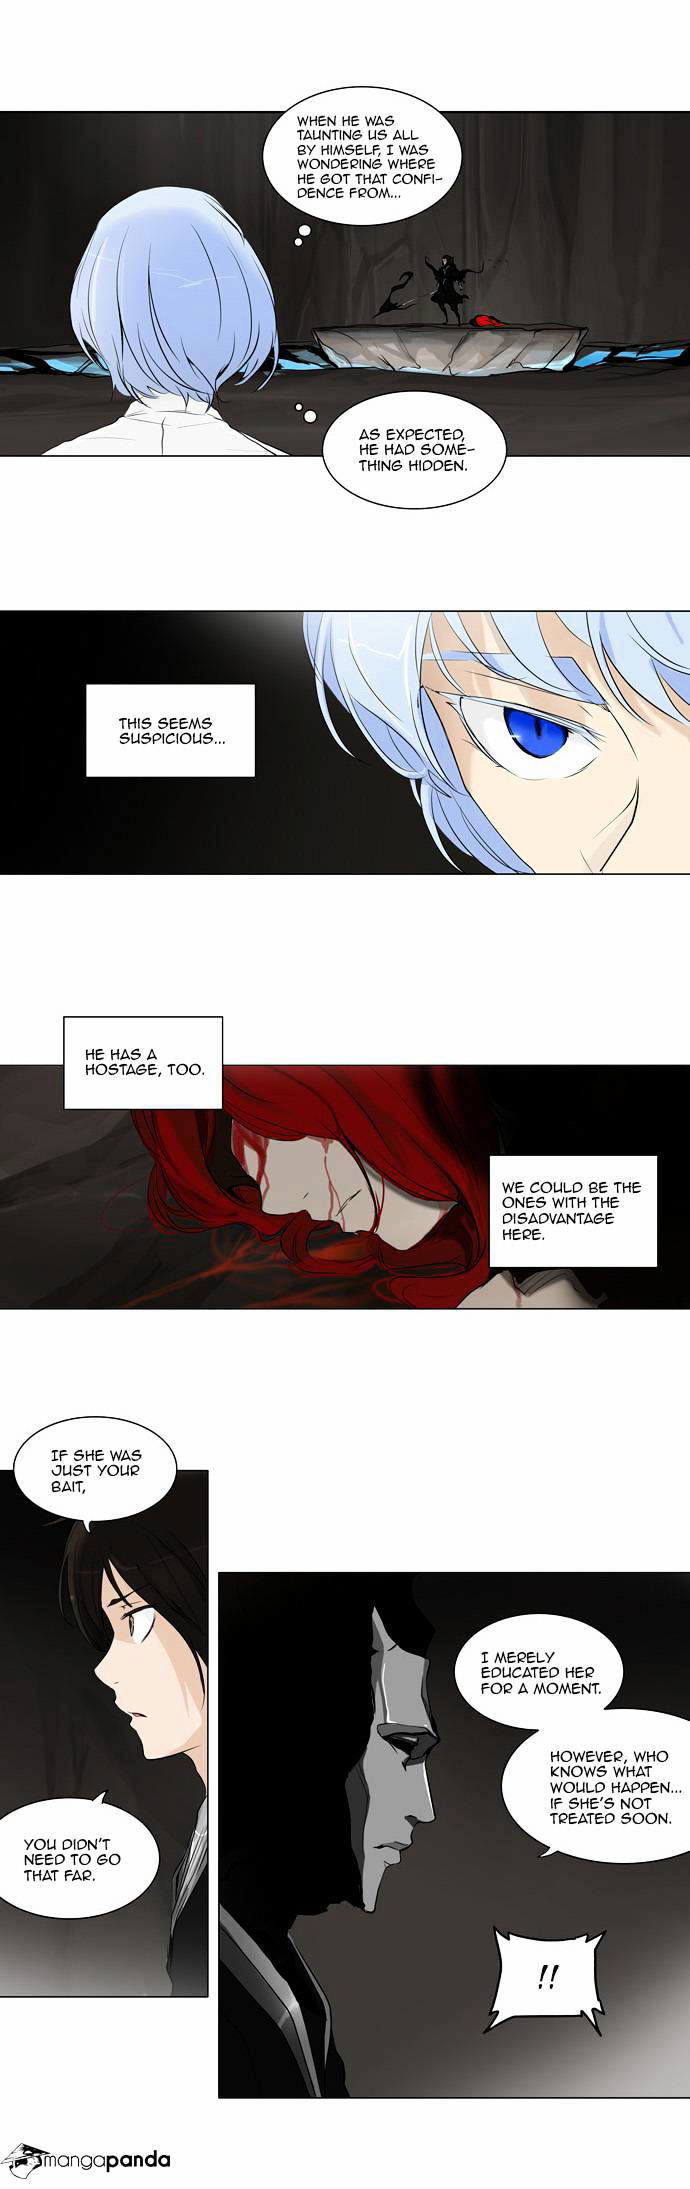 Tower of God Chapter 180 page 3